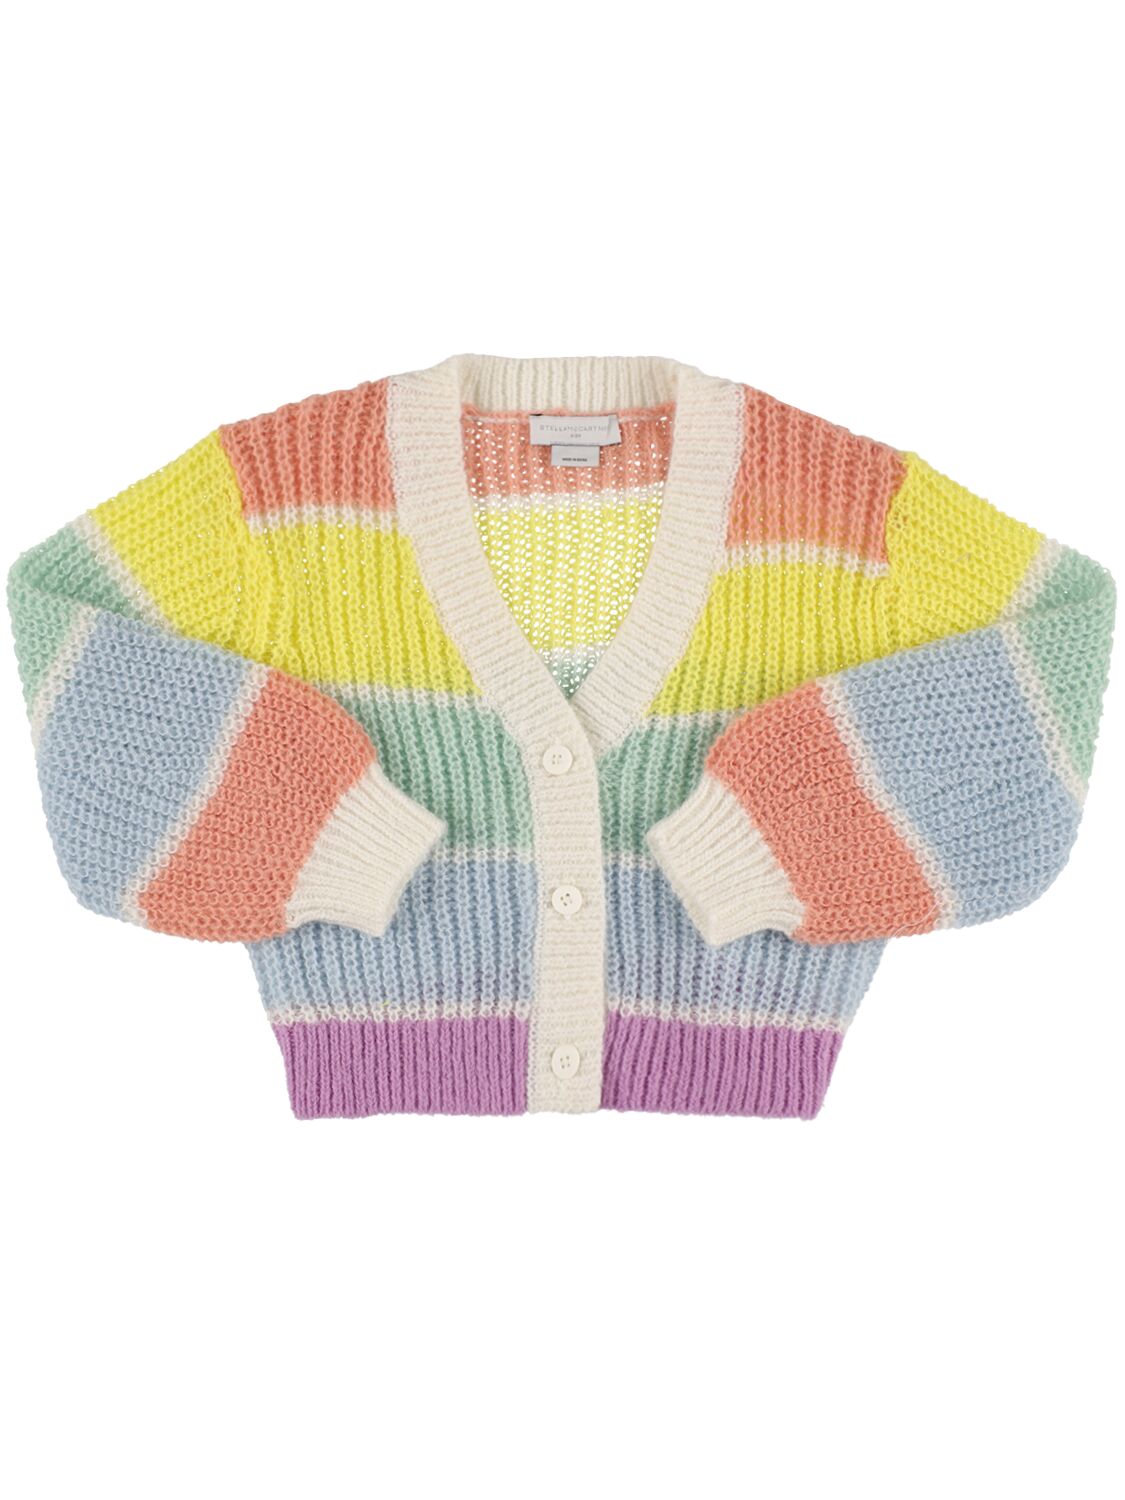 Image of Striped Recycled Poly Knit Cardigan